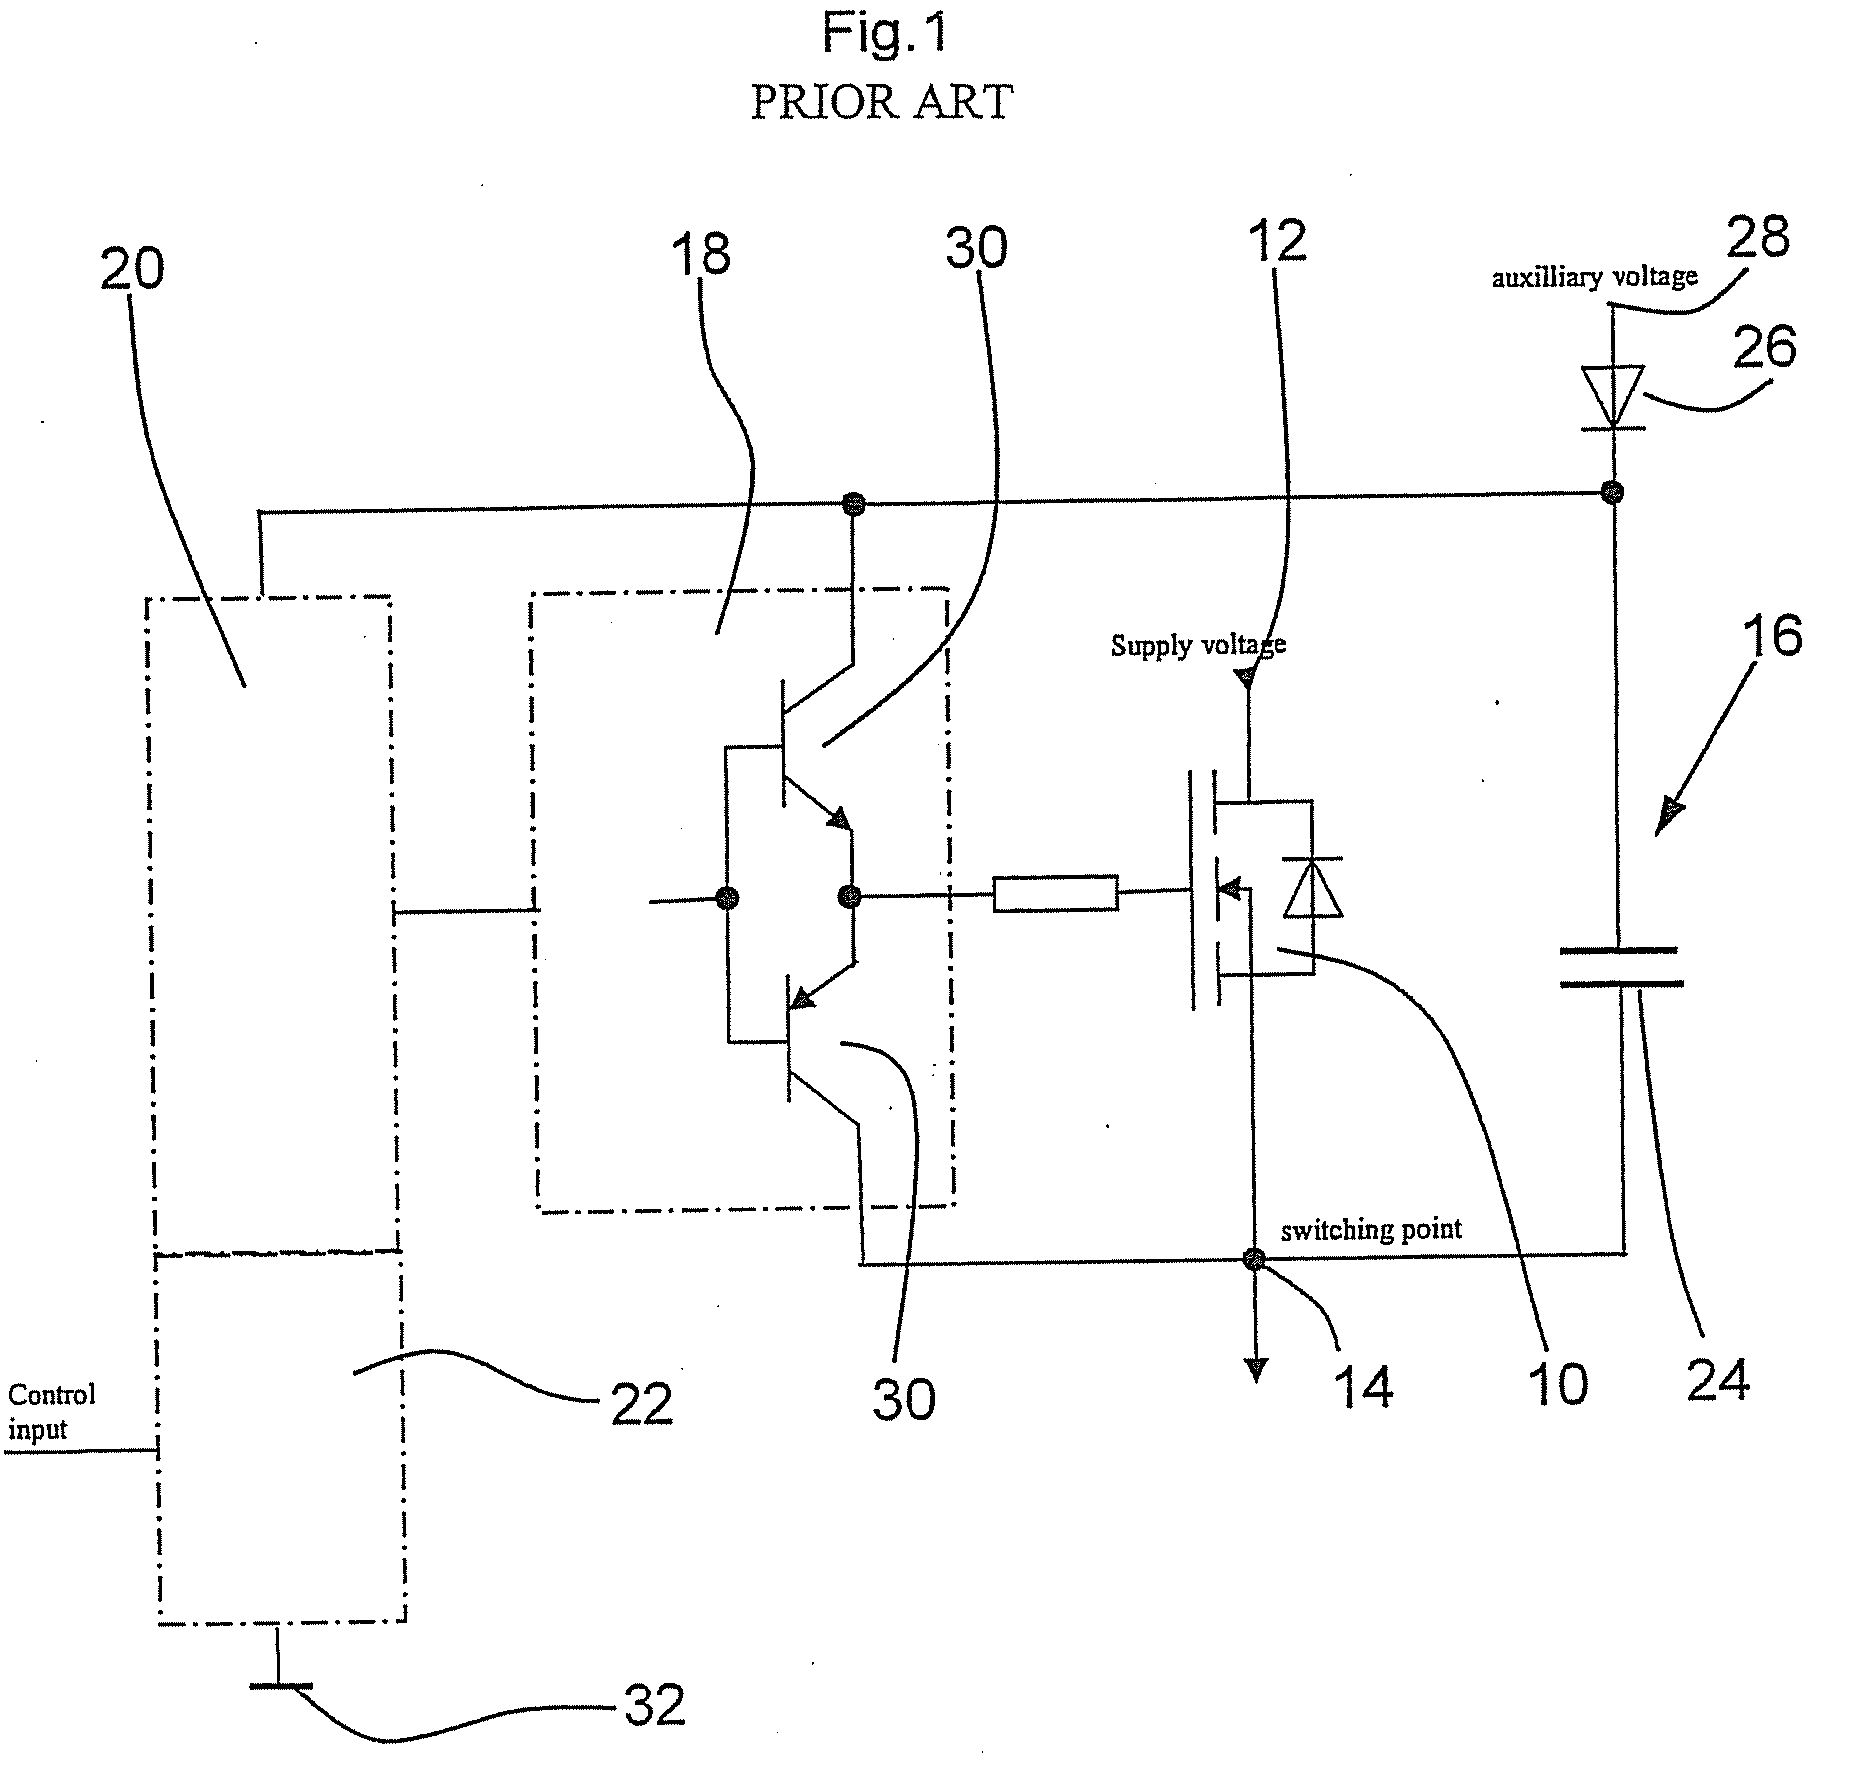 Control circuit for a high-side semiconductor switch for switching a supply voltage